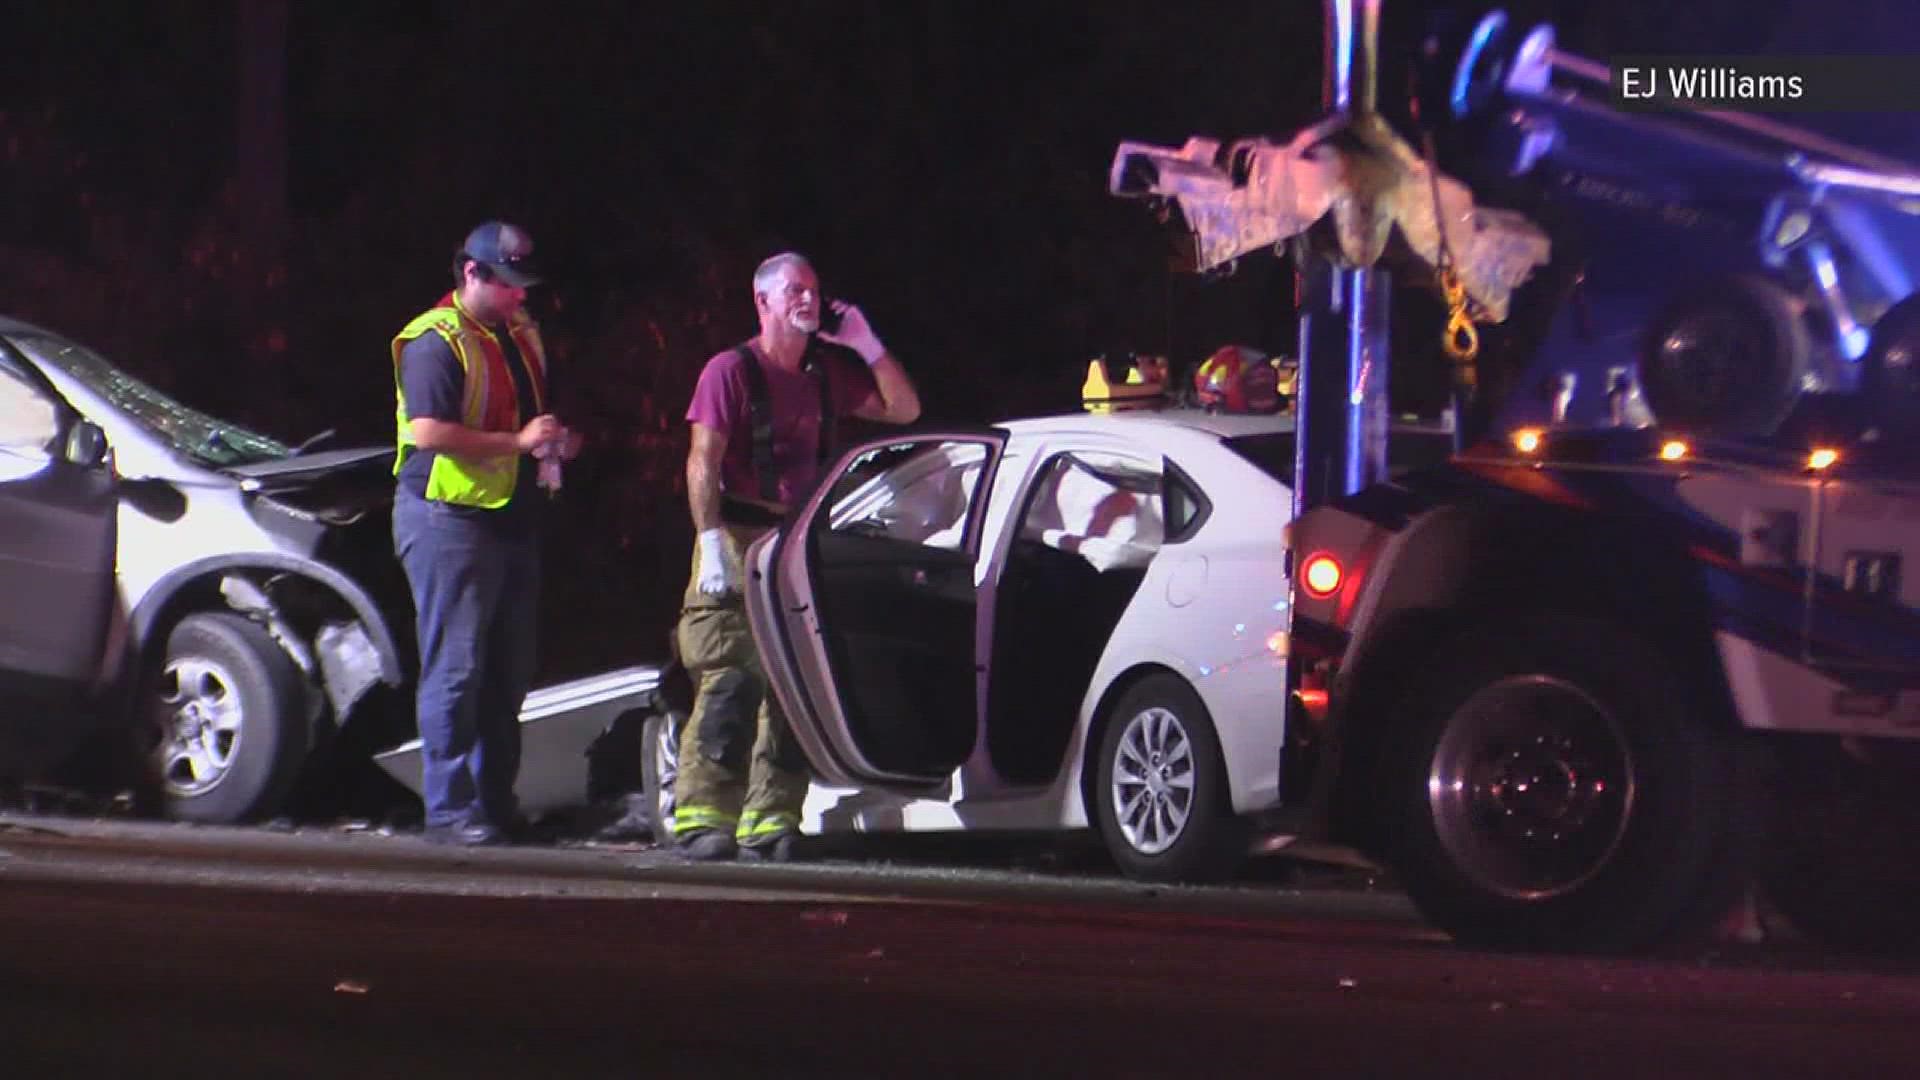 The wreck happened at about 9:30 p.m. along Texas 62 near Tulane Rd.